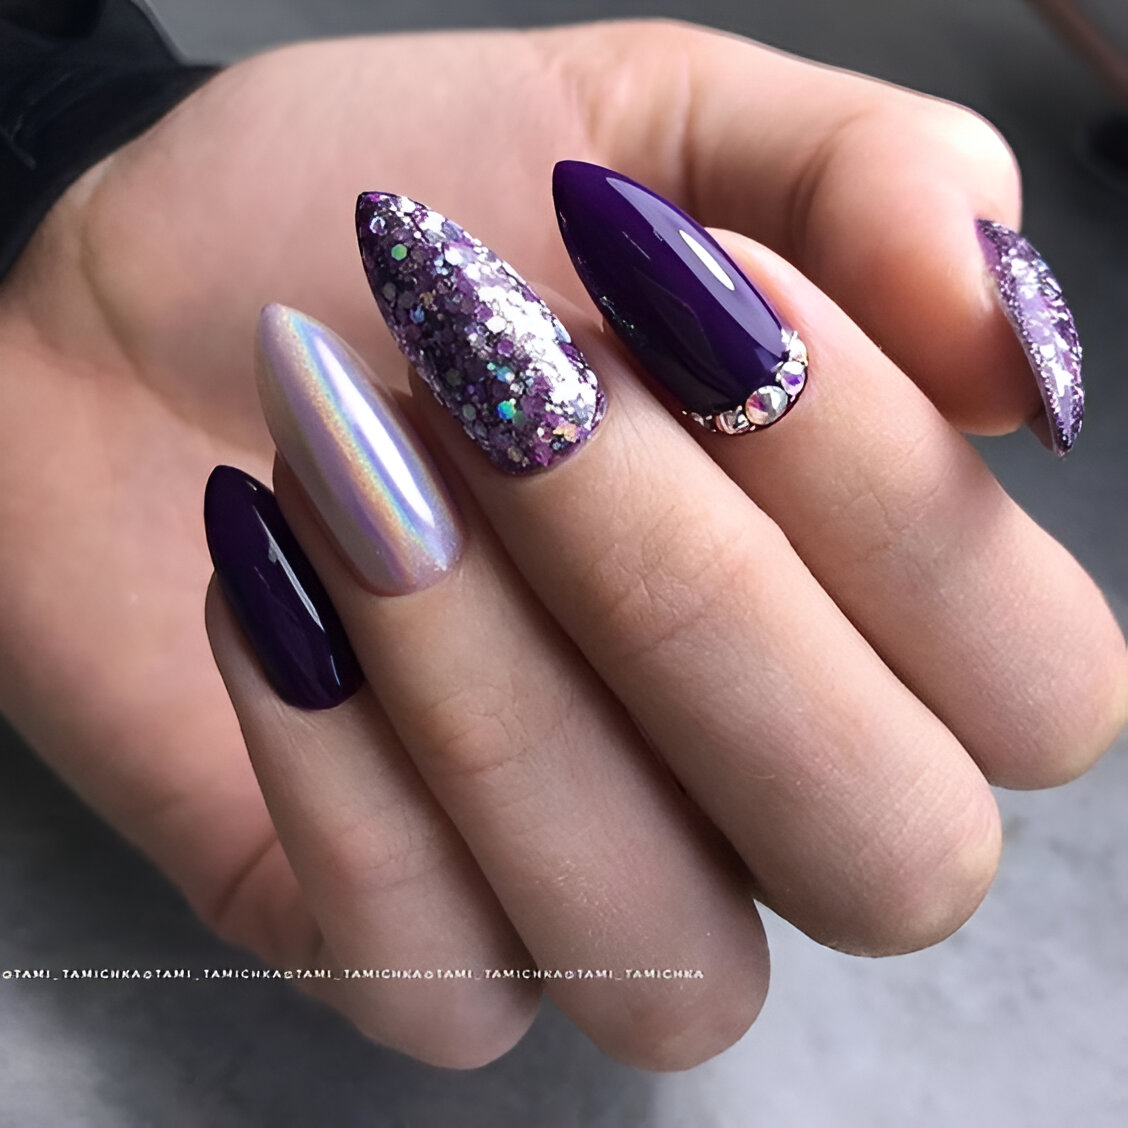 Fancy Short Almond Nails With Gems